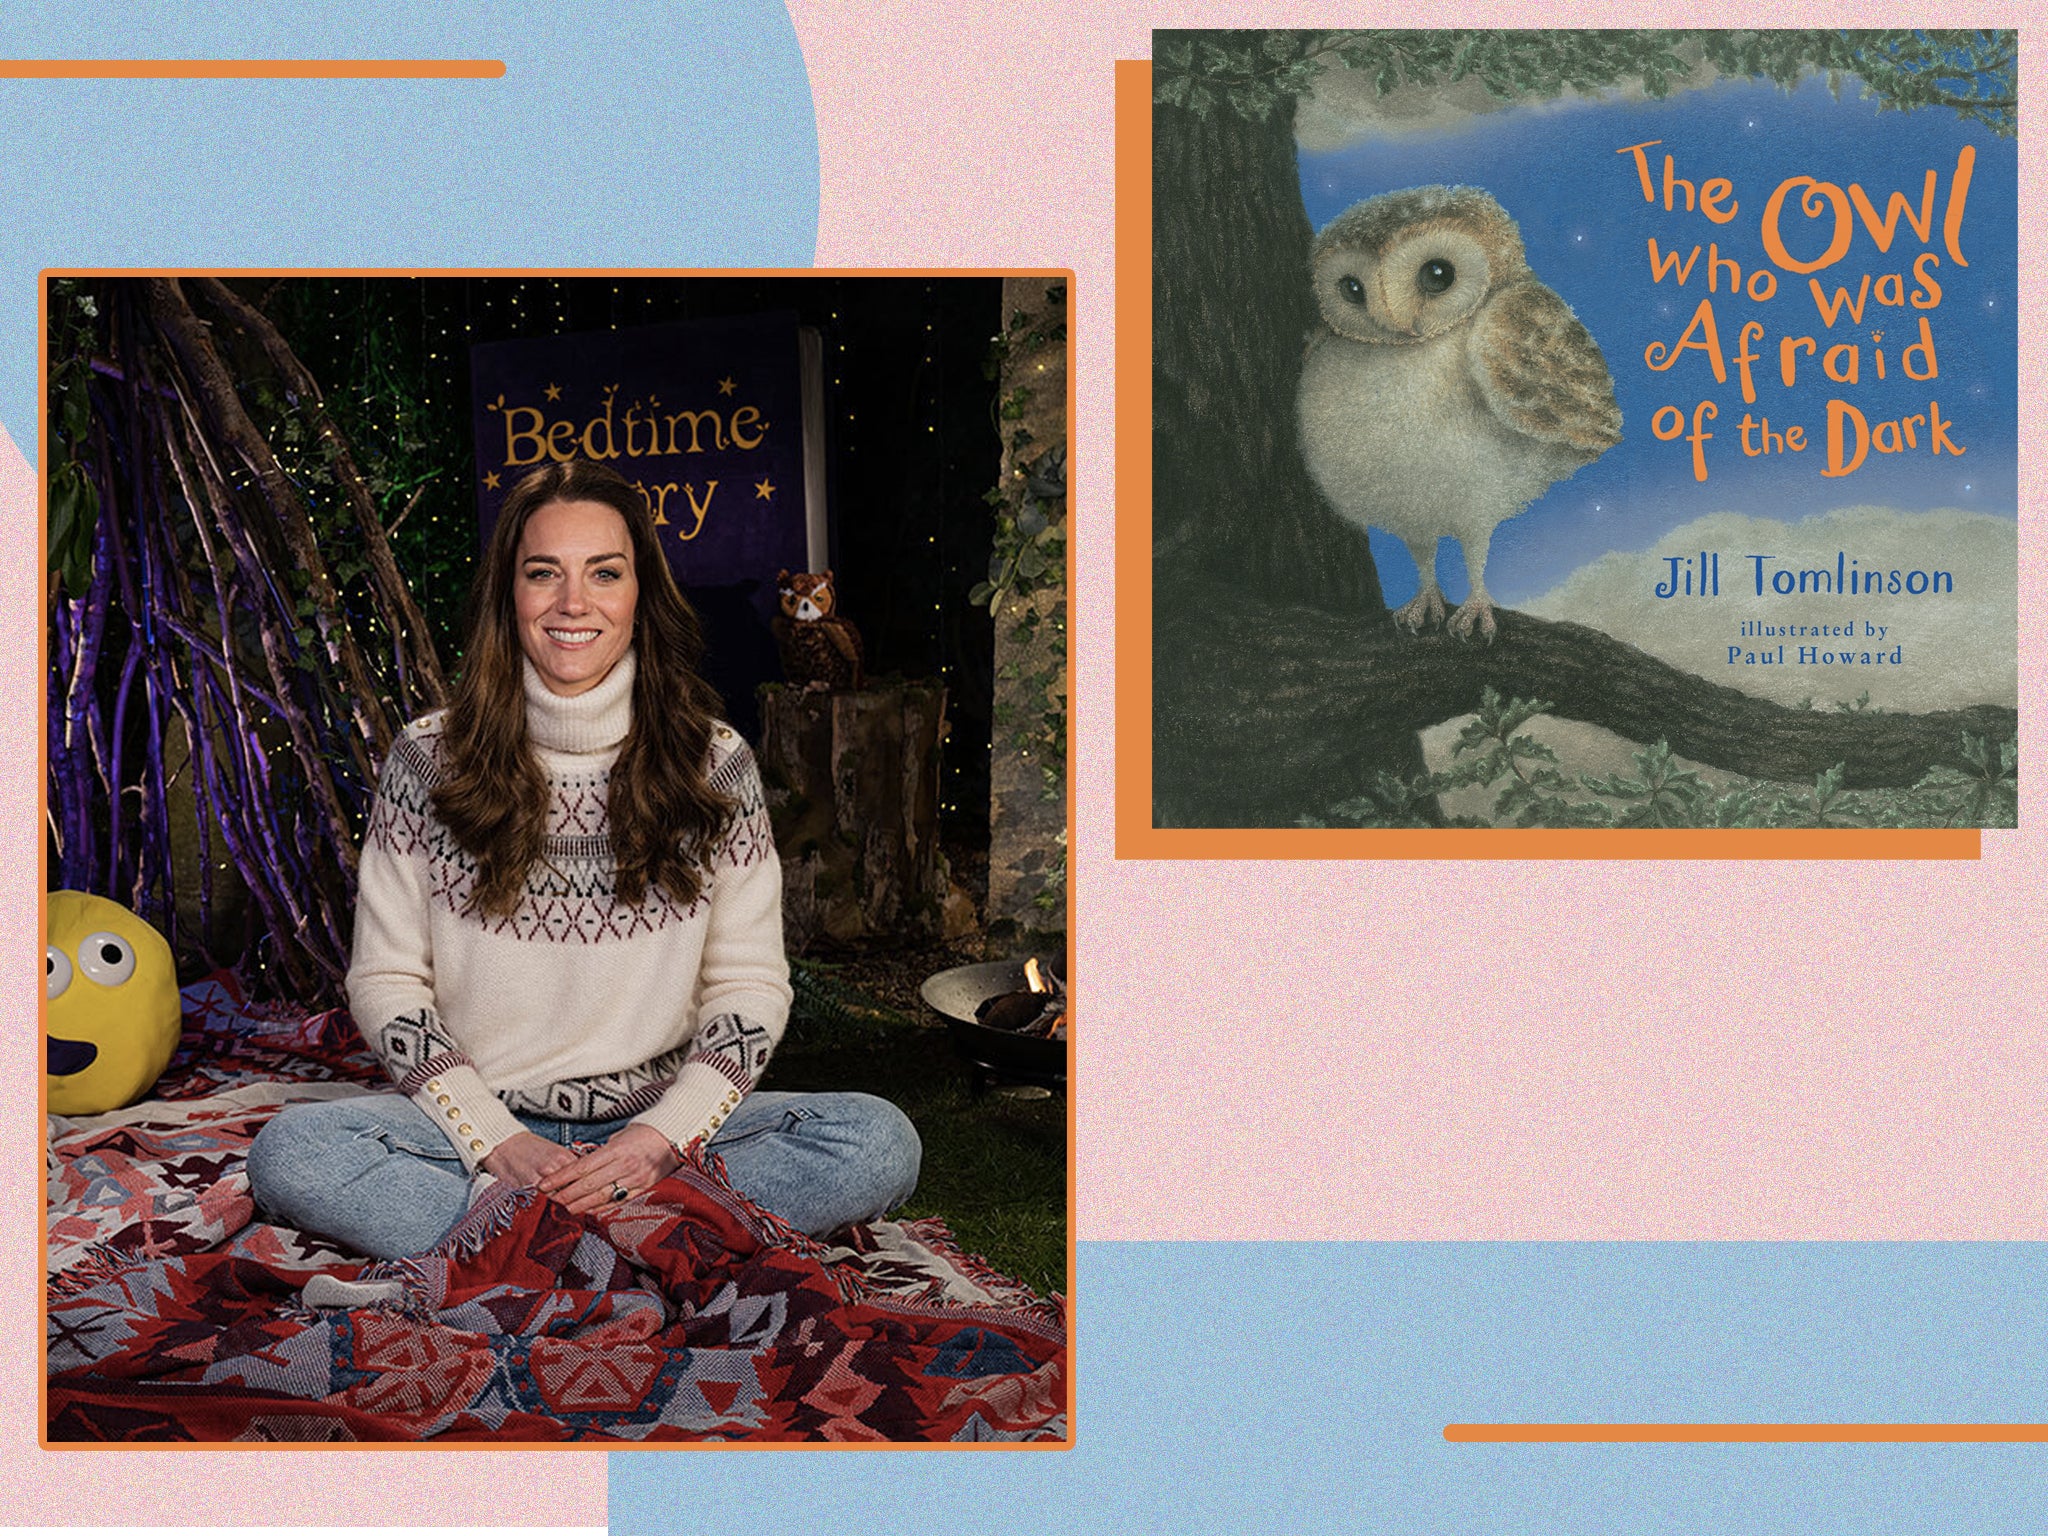 The book follows the story of Plop, a baby barn owl who is helped by others to grow in confidence